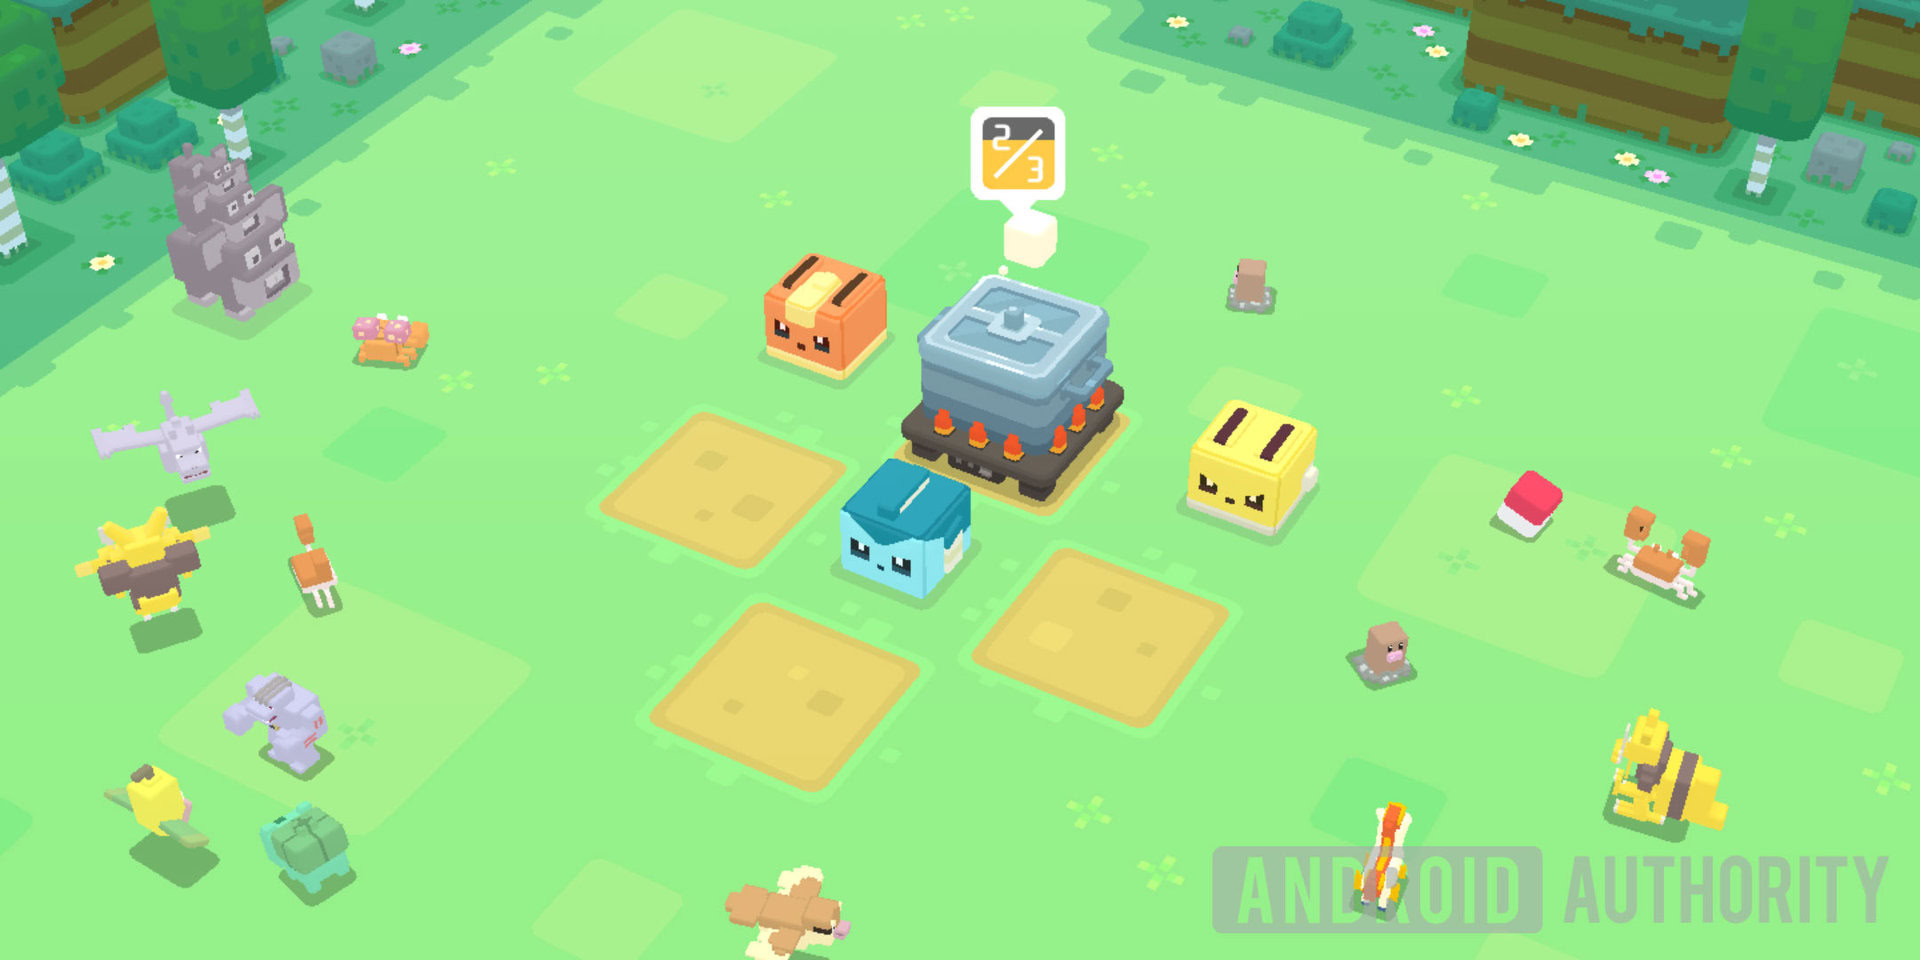 Pokemon Quest How To Catch Each Pokemon Guide